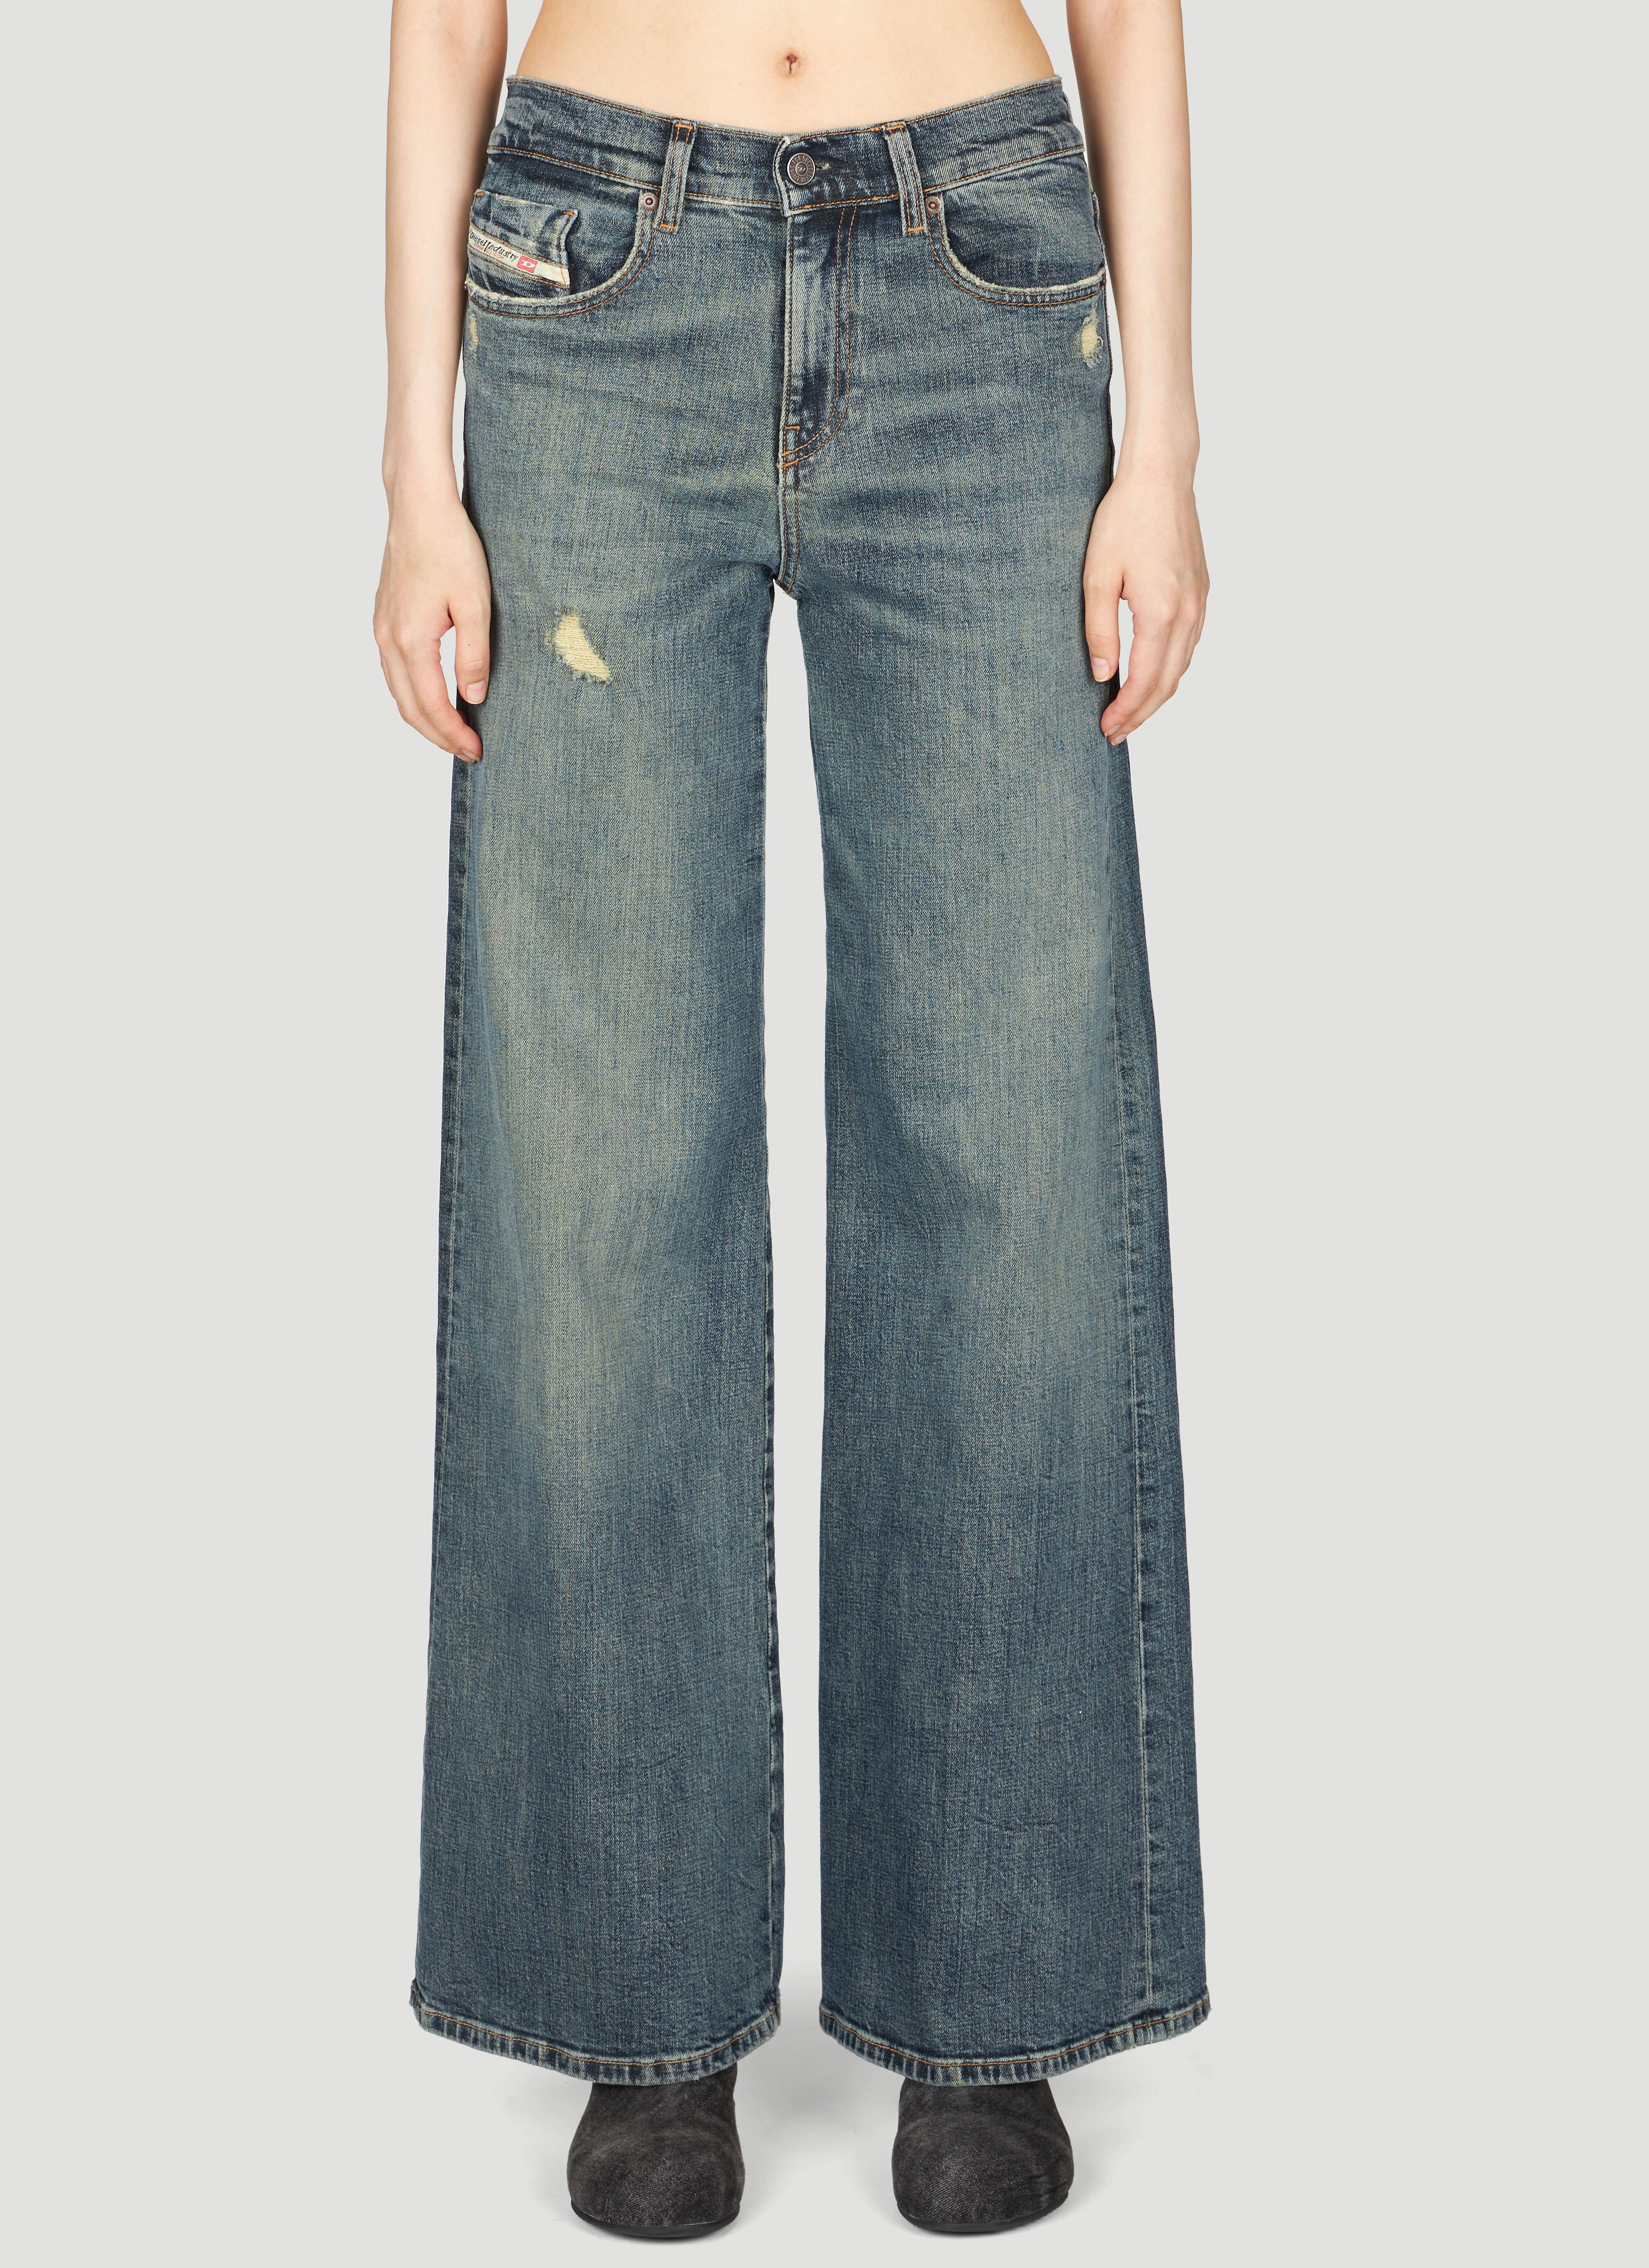 Our Legacy 1978 D-Akemi 0dqac Jeans Blue our0257008